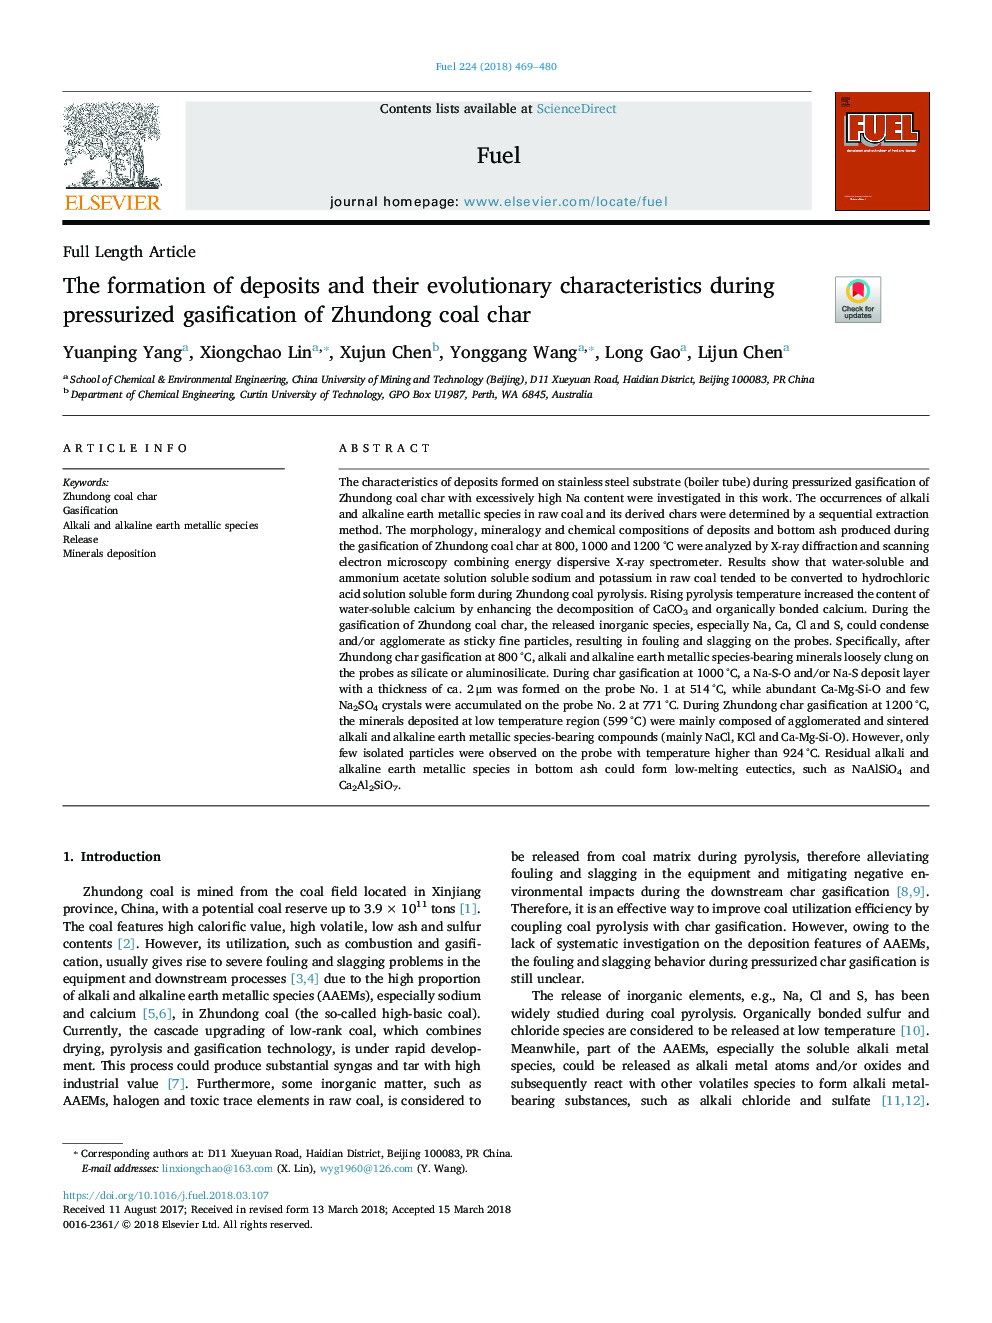 The formation of deposits and their evolutionary characteristics during pressurized gasification of Zhundong coal char